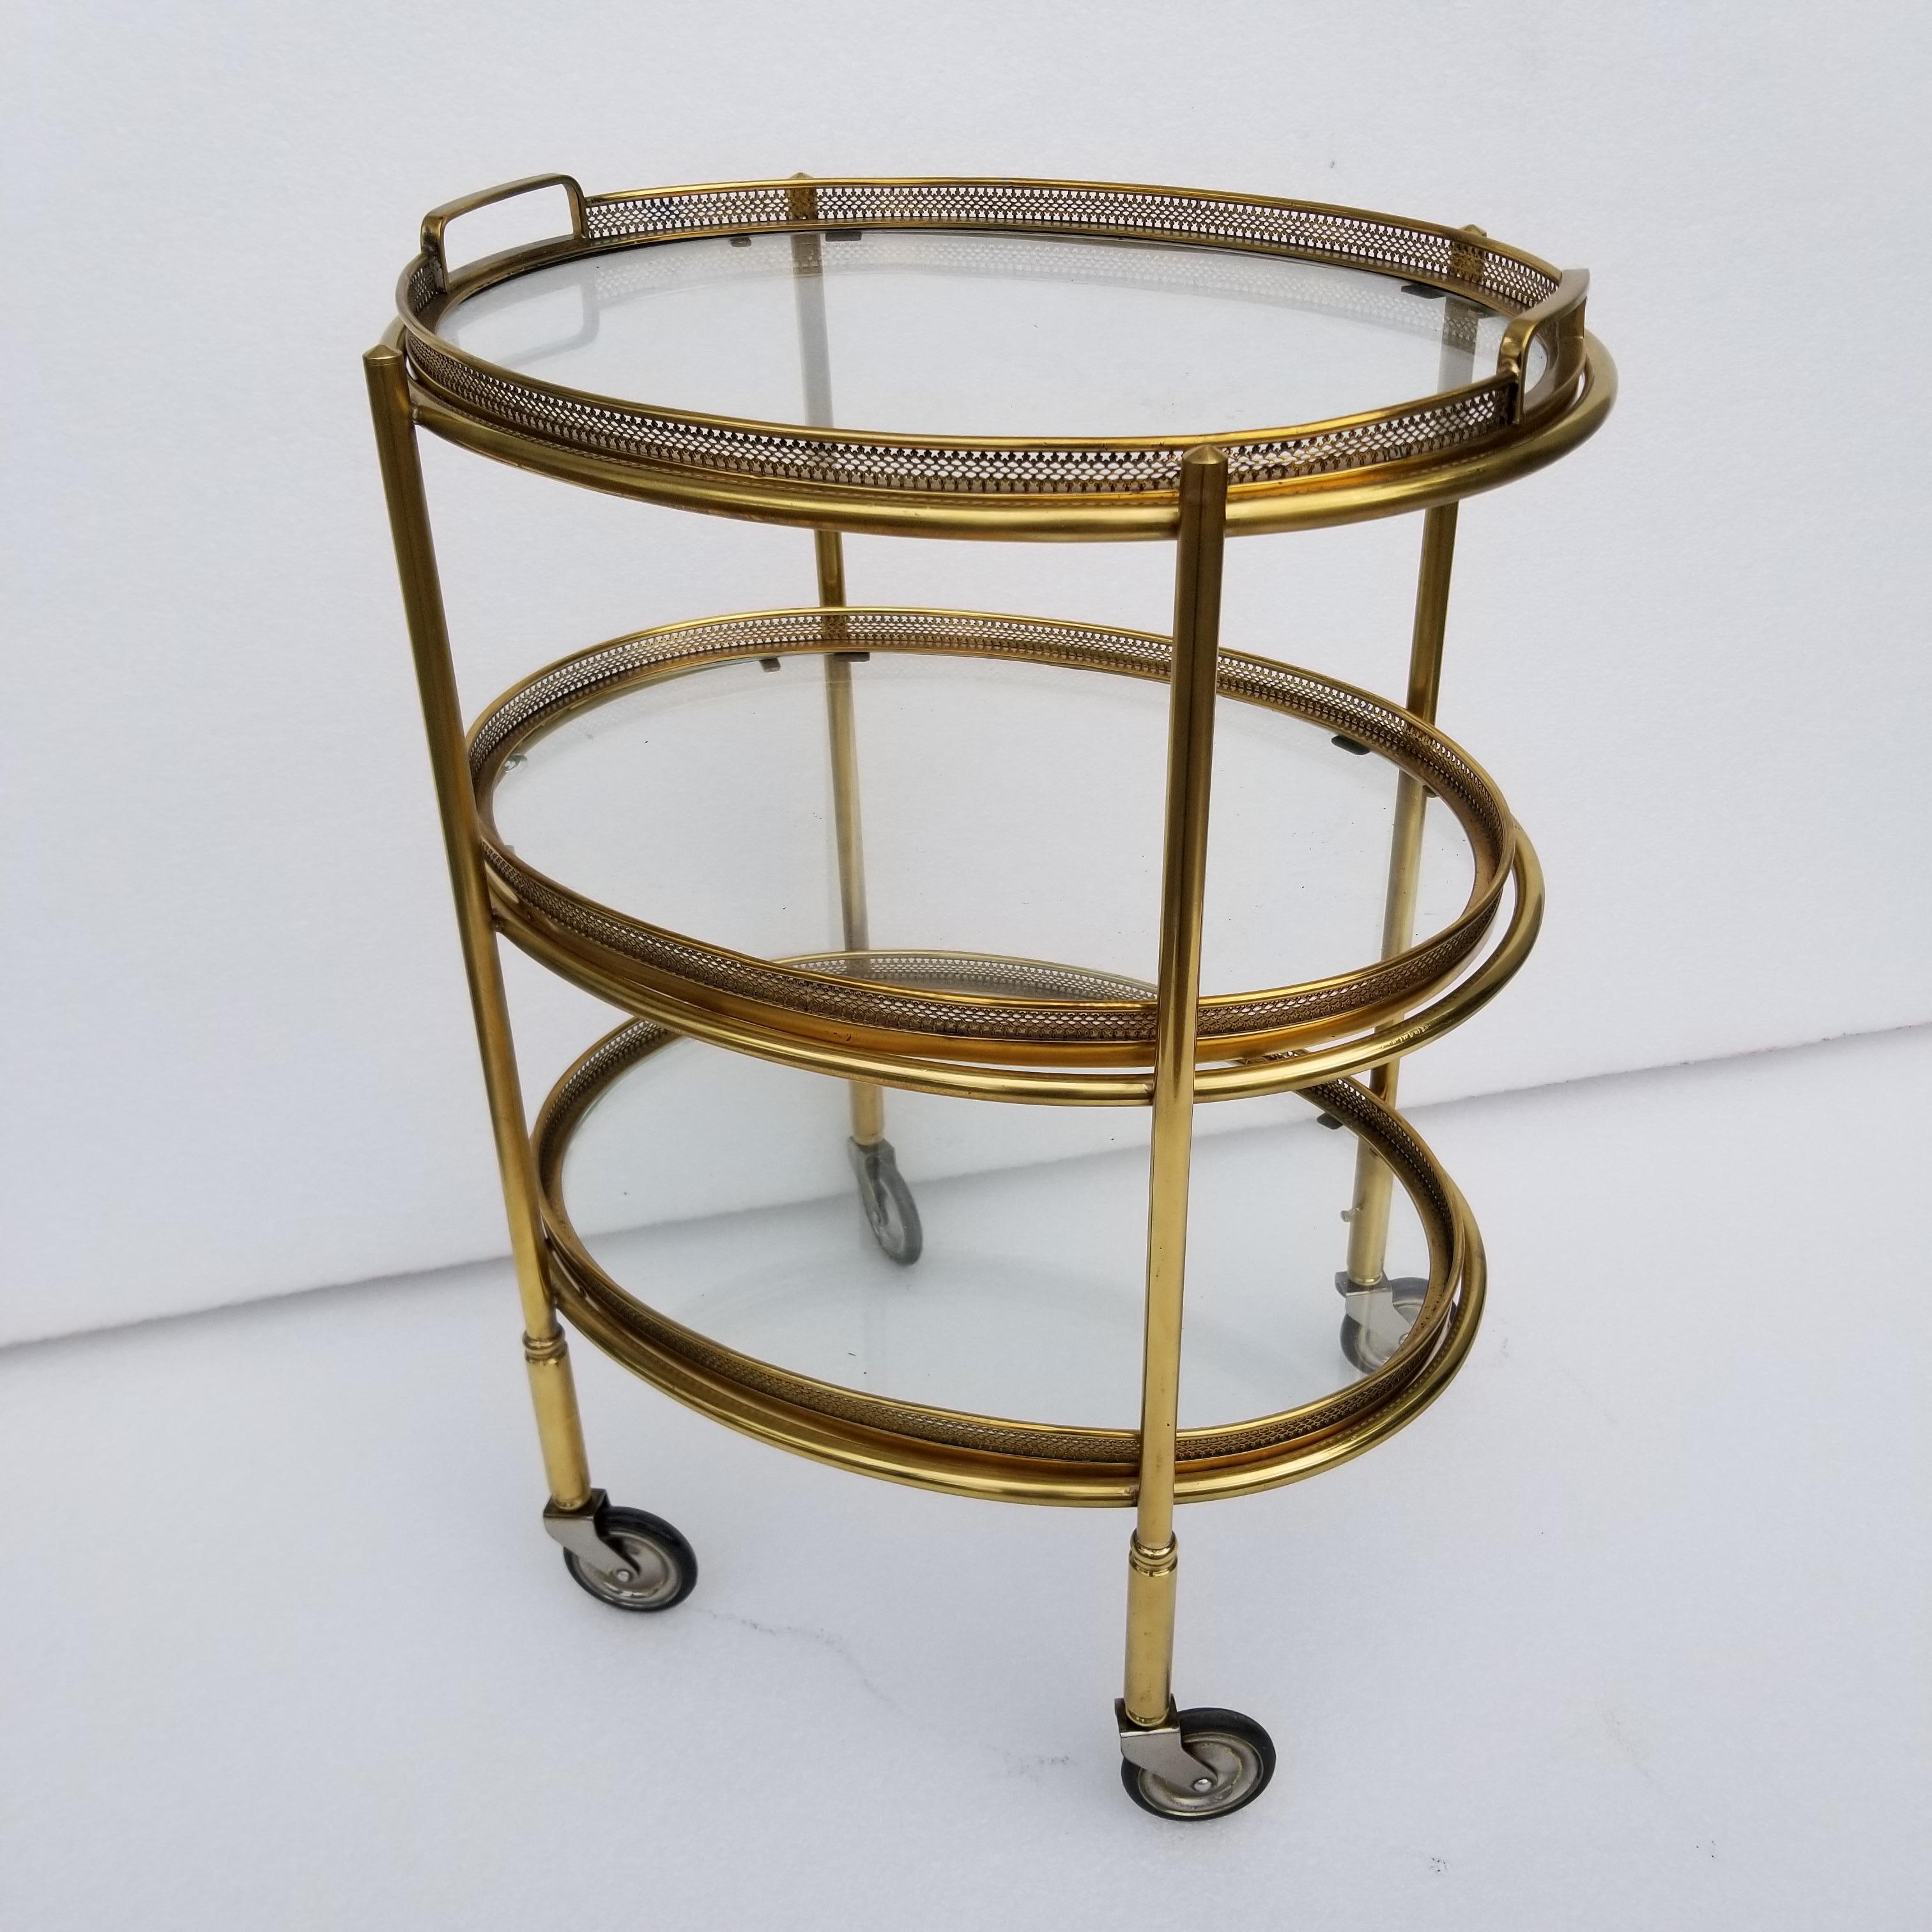 Superb Maison Baguès style three-tier bar cart. Three trays are removable.
Tray dimensions: 15 long, 12 wide.